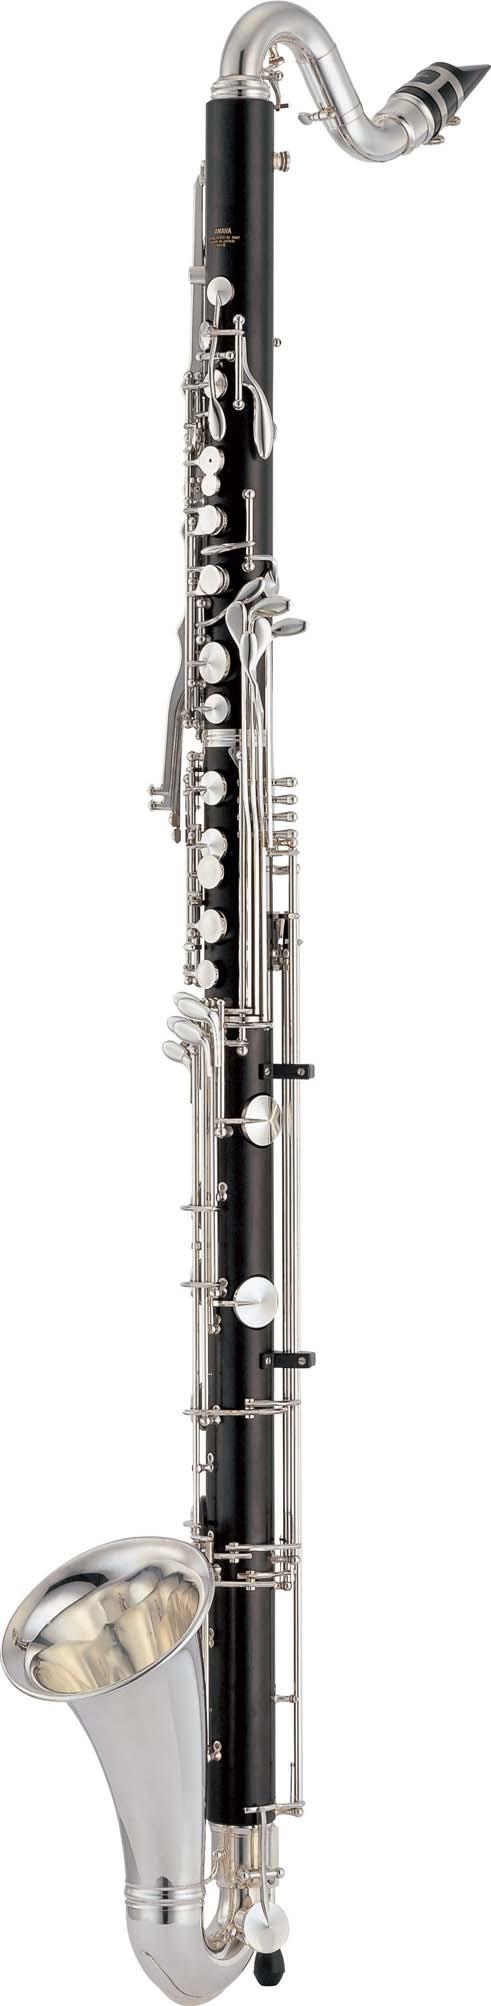 Professional B BASS CLARINET YCL-622II Range to low C 24 keys, 7 covered finger holes and bell